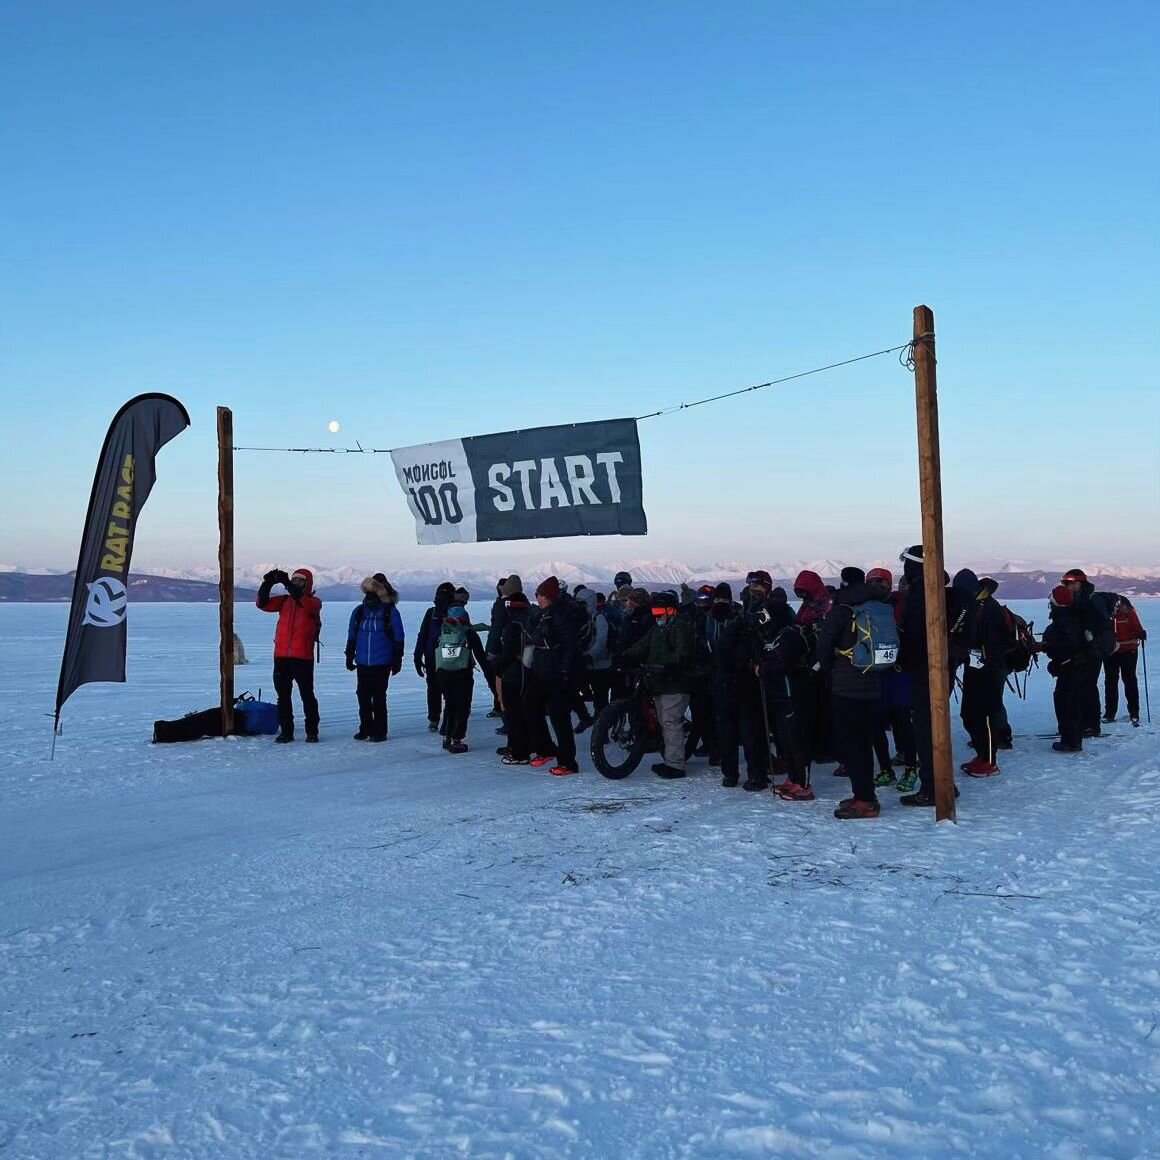 Check out @harrisonbanks blog post about being an Trailmed expedition medic for the epic @ratracehq Mongolia 100 event. The participants tackle 100 miles across a frozen lake in the depths of outer Mongolia approximately 16hours from the nearest main